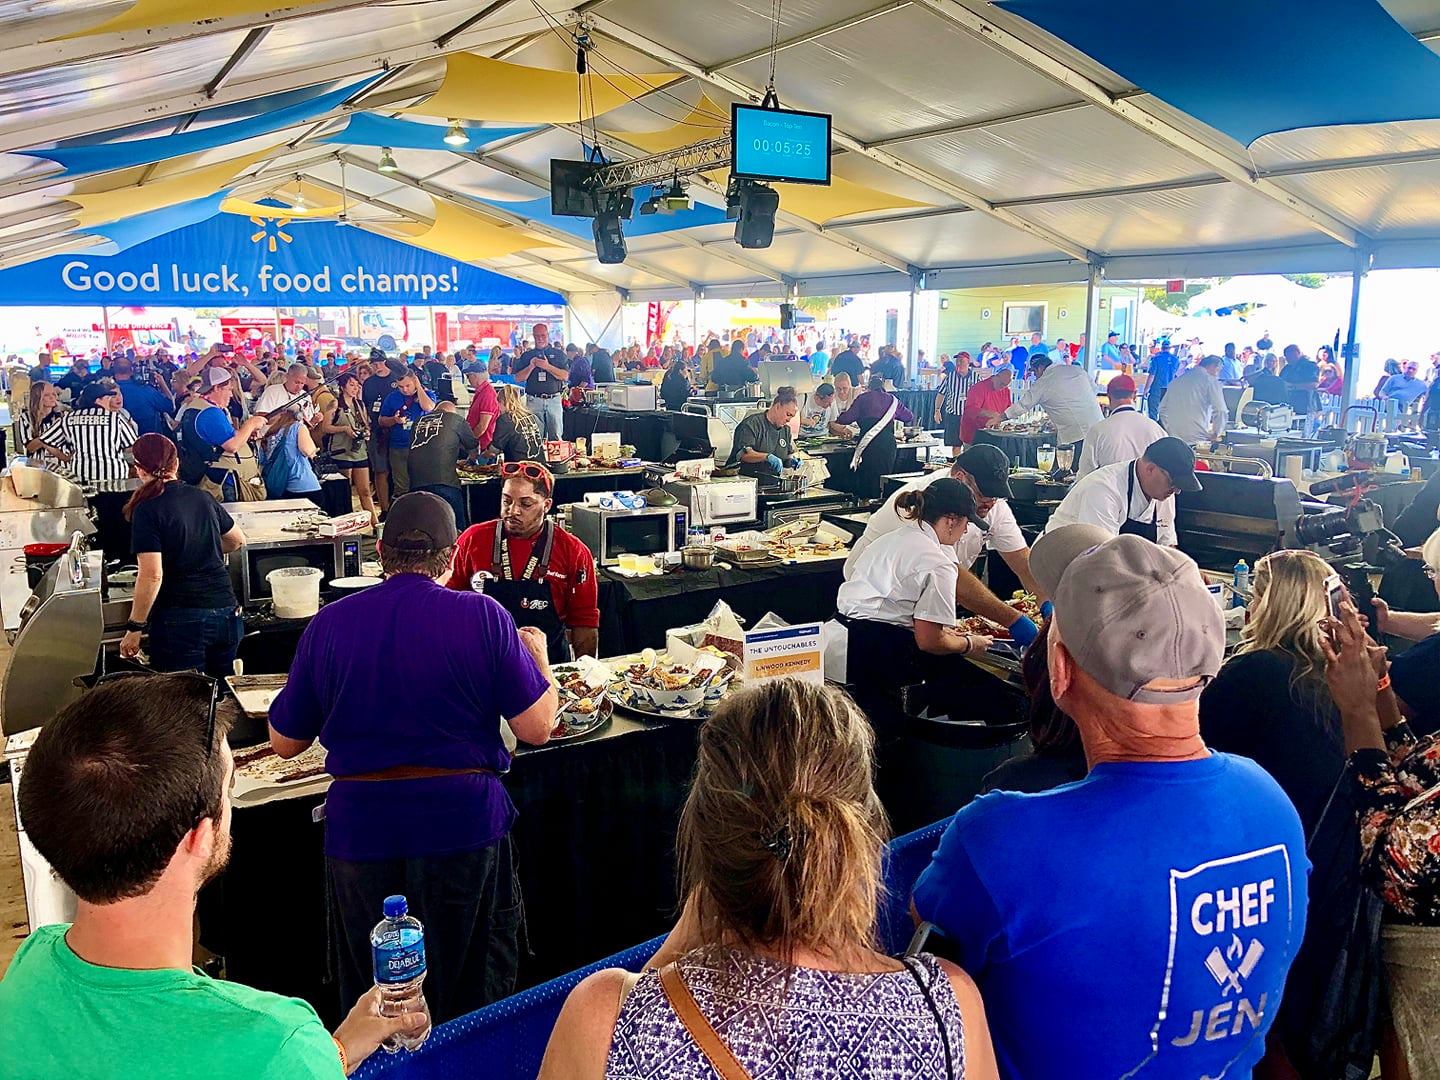 A Baker’s Dozen Of Experiences At The World Food Championships’ Flavor Fest